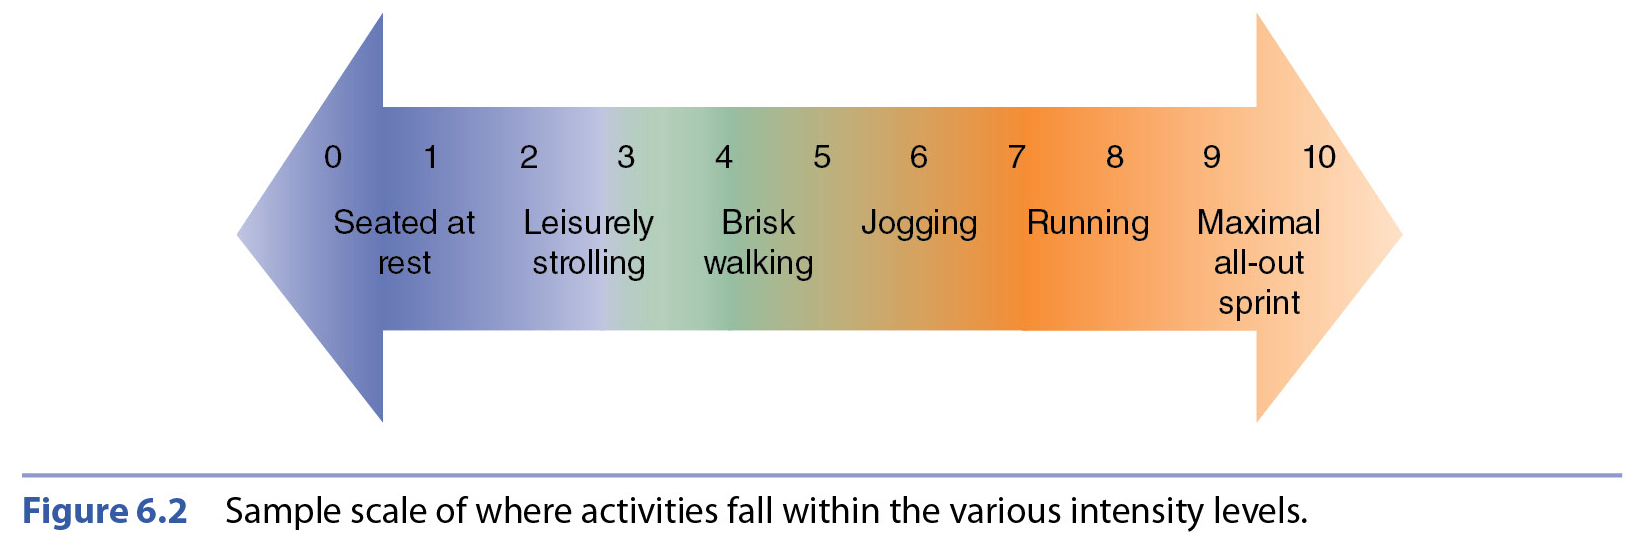 physical activity definition wikipedia